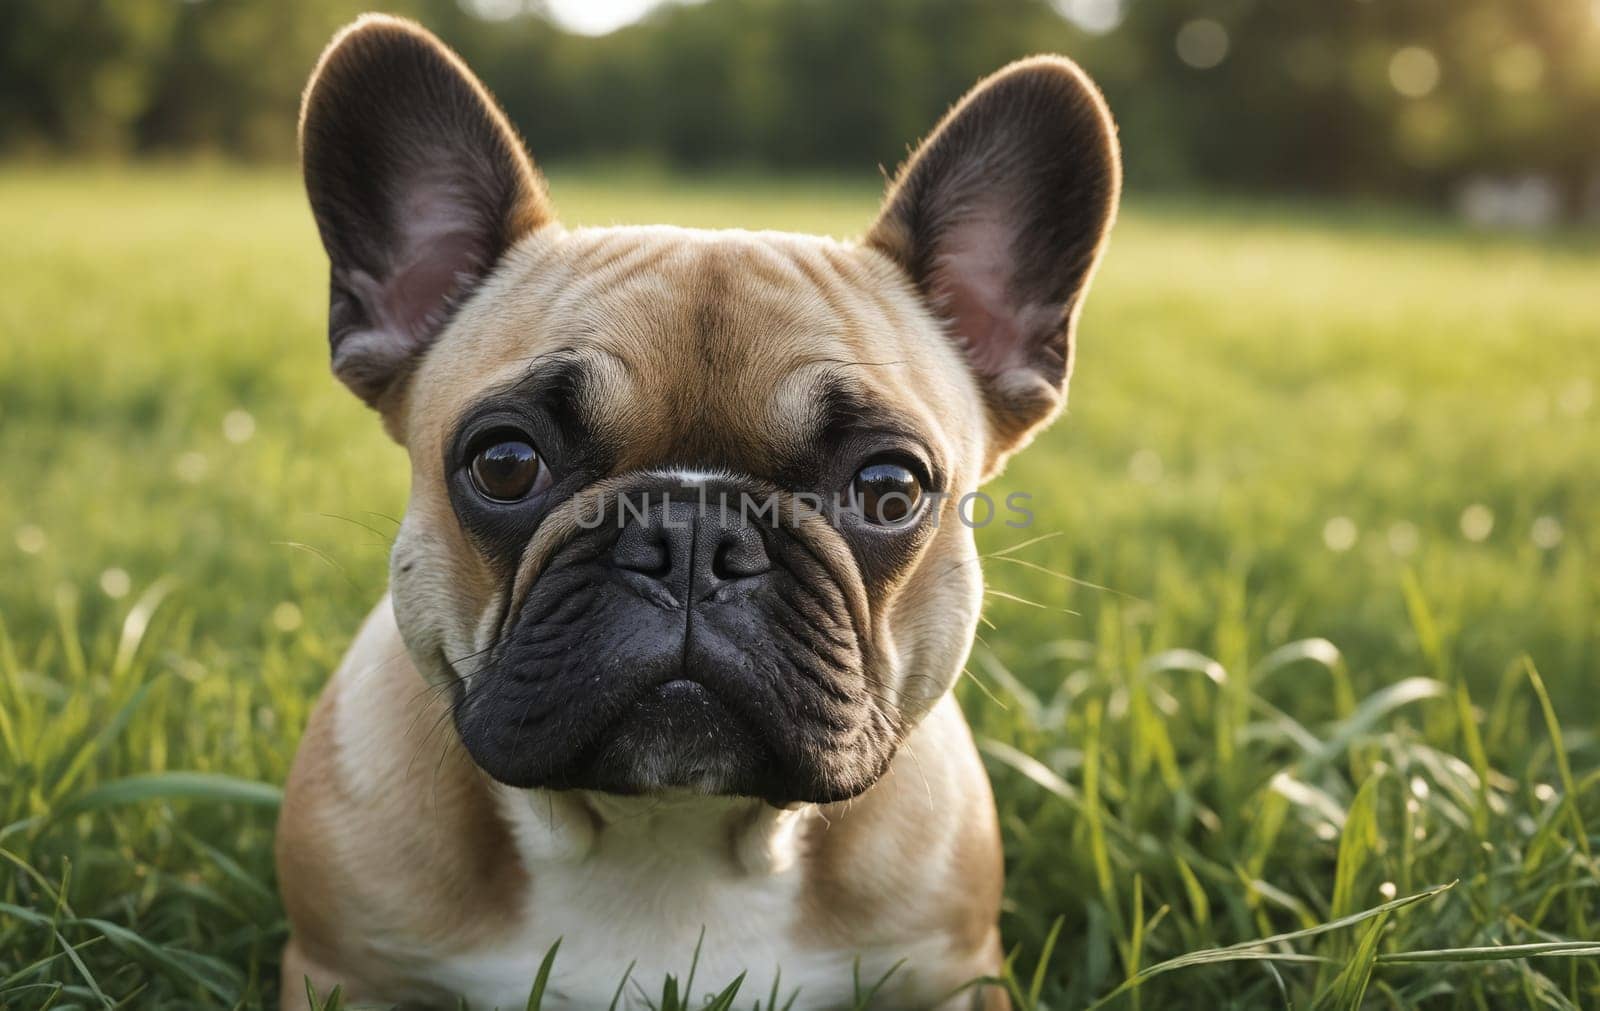 A fawn French Bulldog, a toy dog breed and carnivore, is lying in the grass, gazing at the camera with its wrinkled face, whiskers, and adorable snout